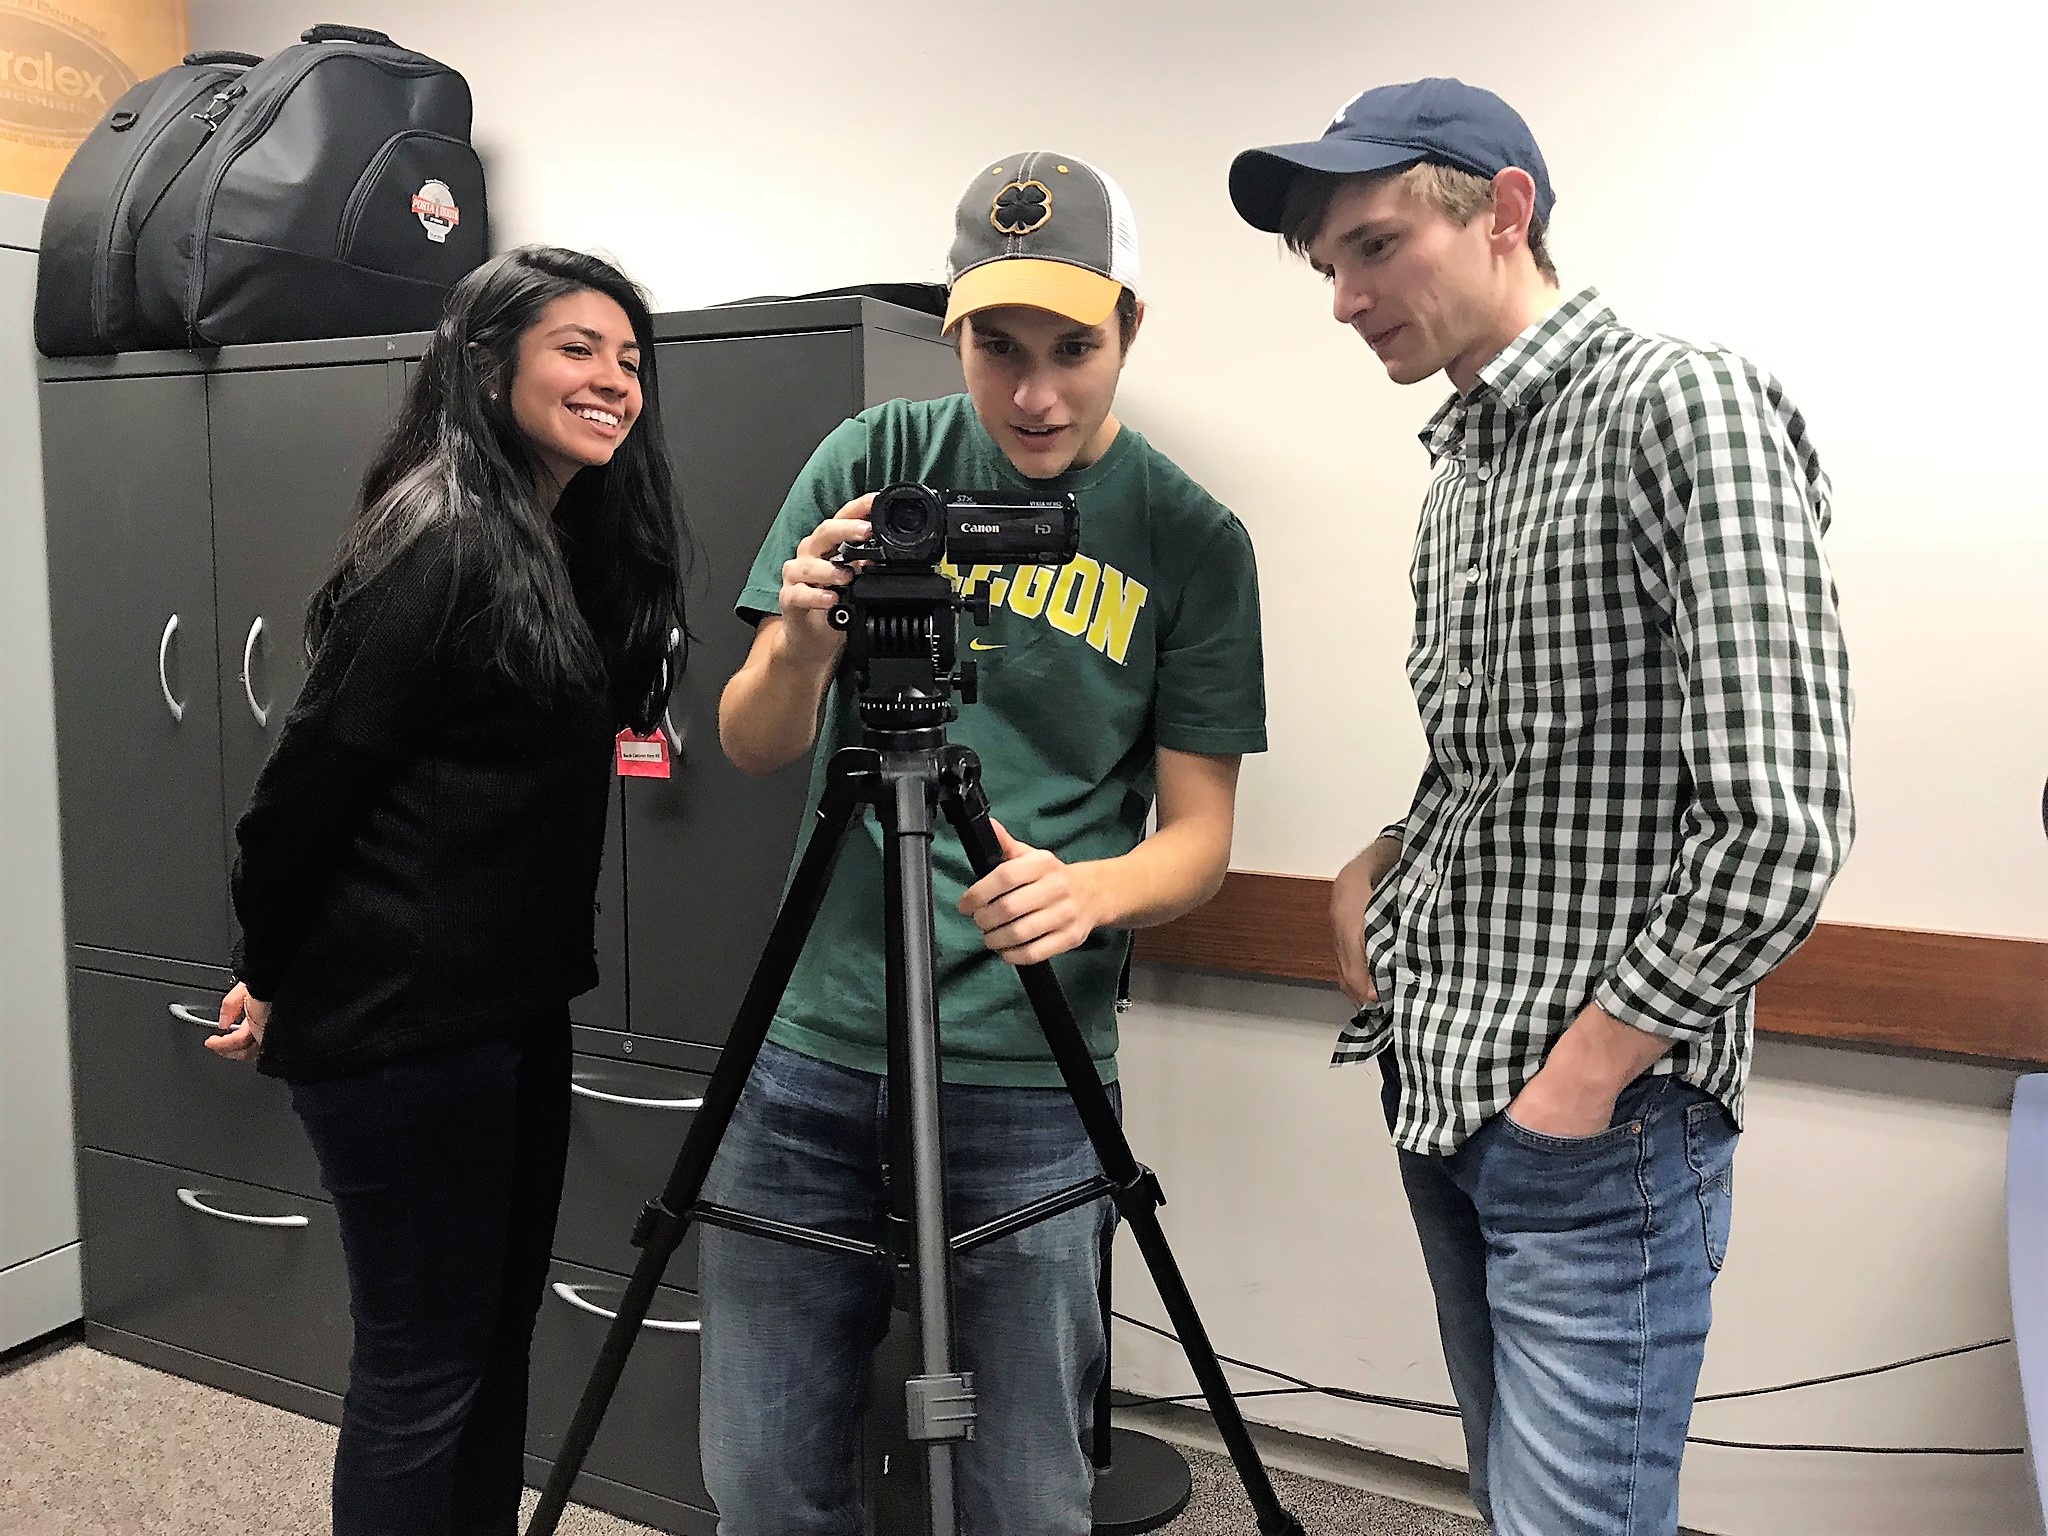 Students test video equipment in the IDEAL lab